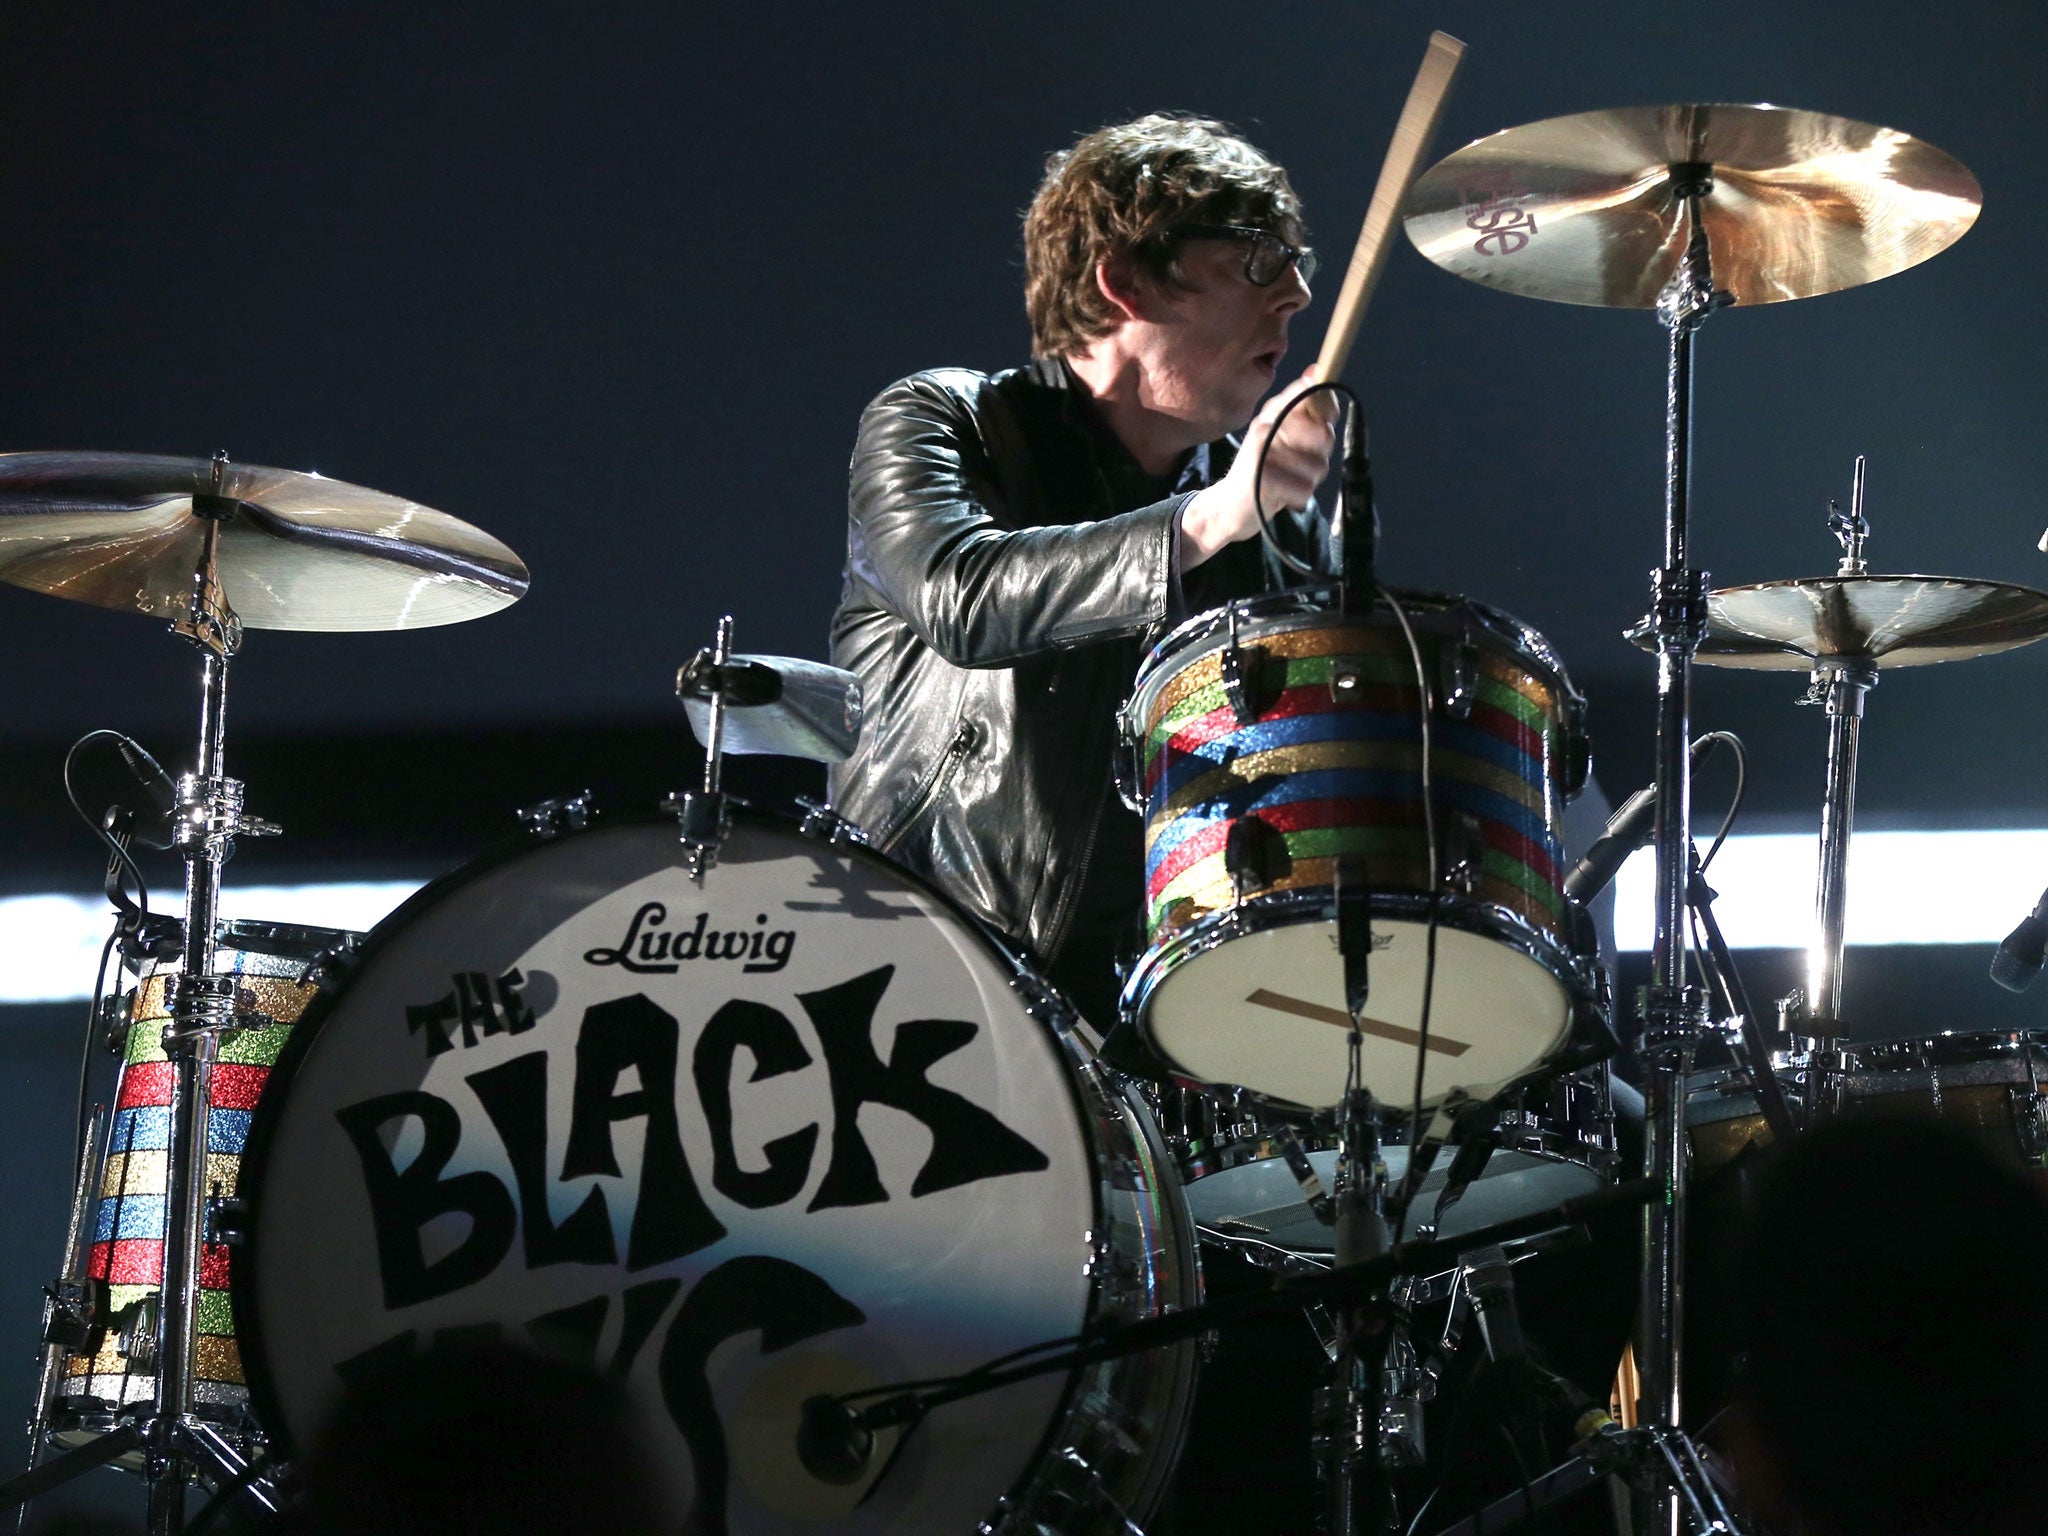 Drummer Patrick Carney of The Black Keys, who will be performing at Glastonbury 2014